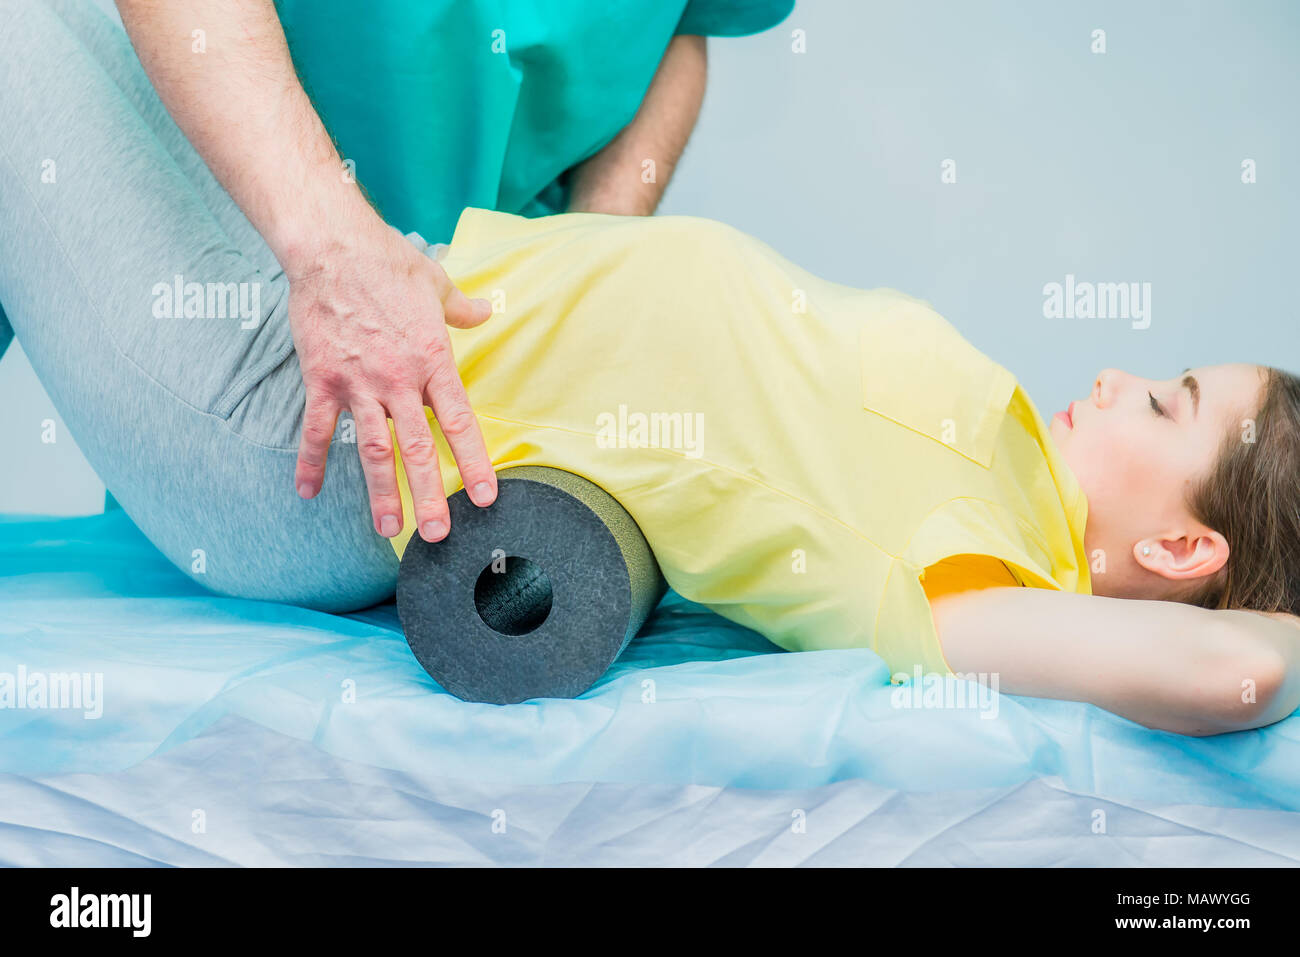 Woman at the physiotherapy doing physical exercises with her therapist, they using a massage roll. A chiropractor treats patient's loins spine in medi Stock Photo